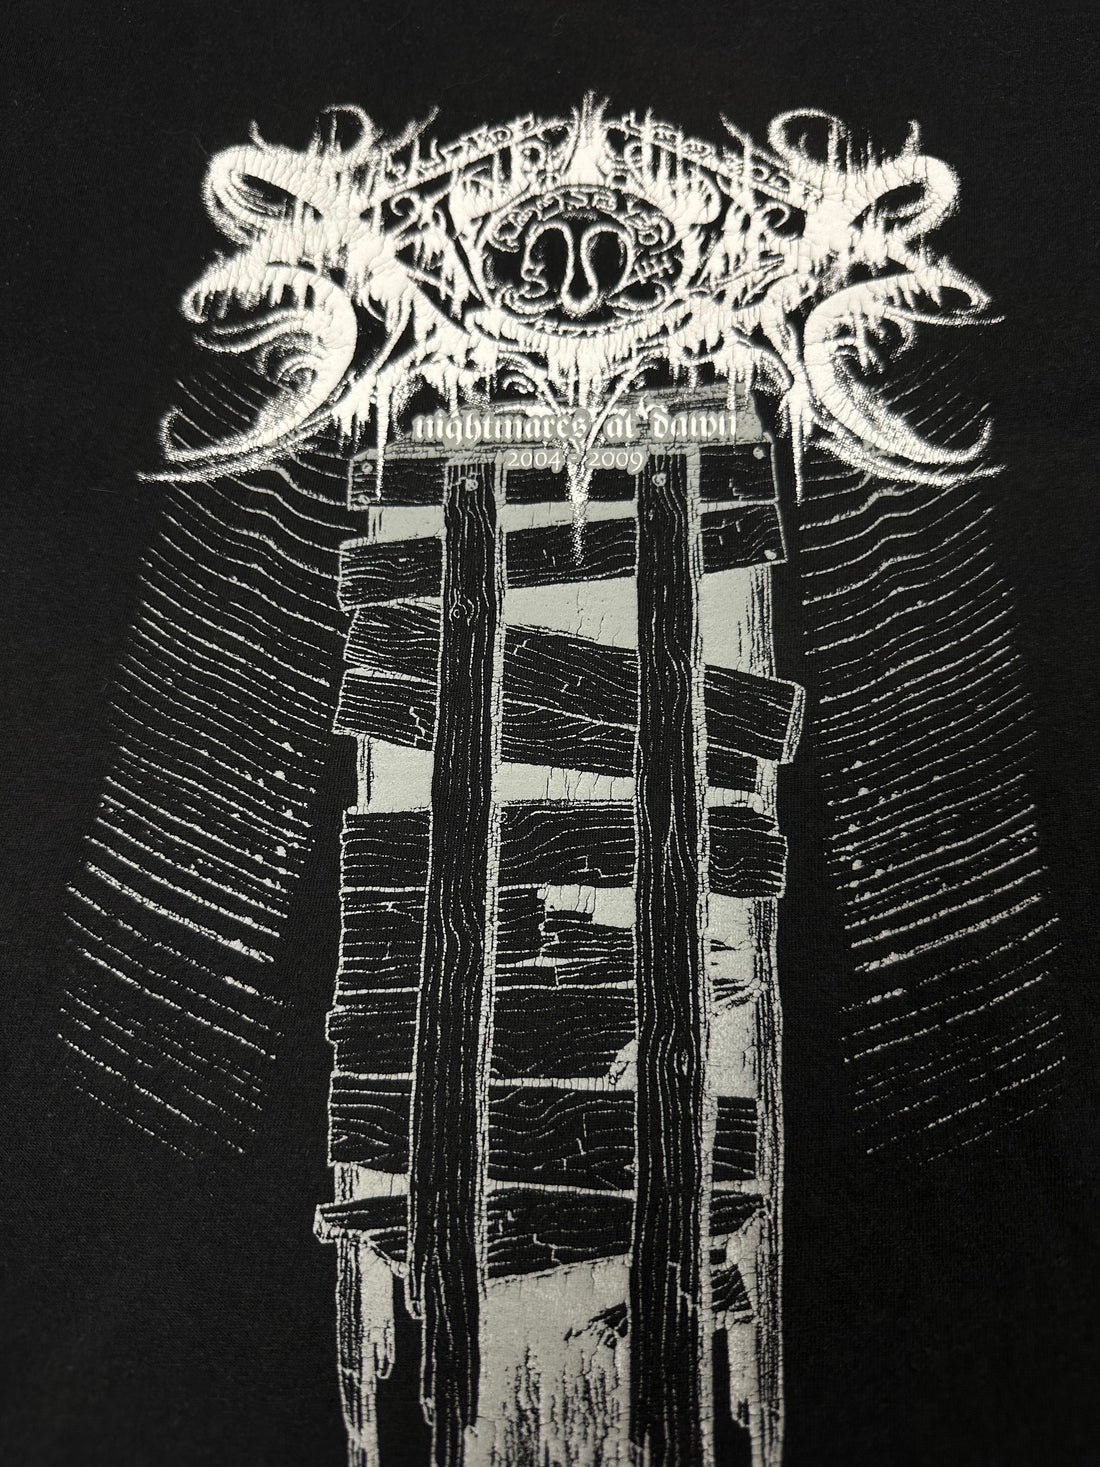 Xasthur 2009 All Reflections Drained DSBM T-Shirt